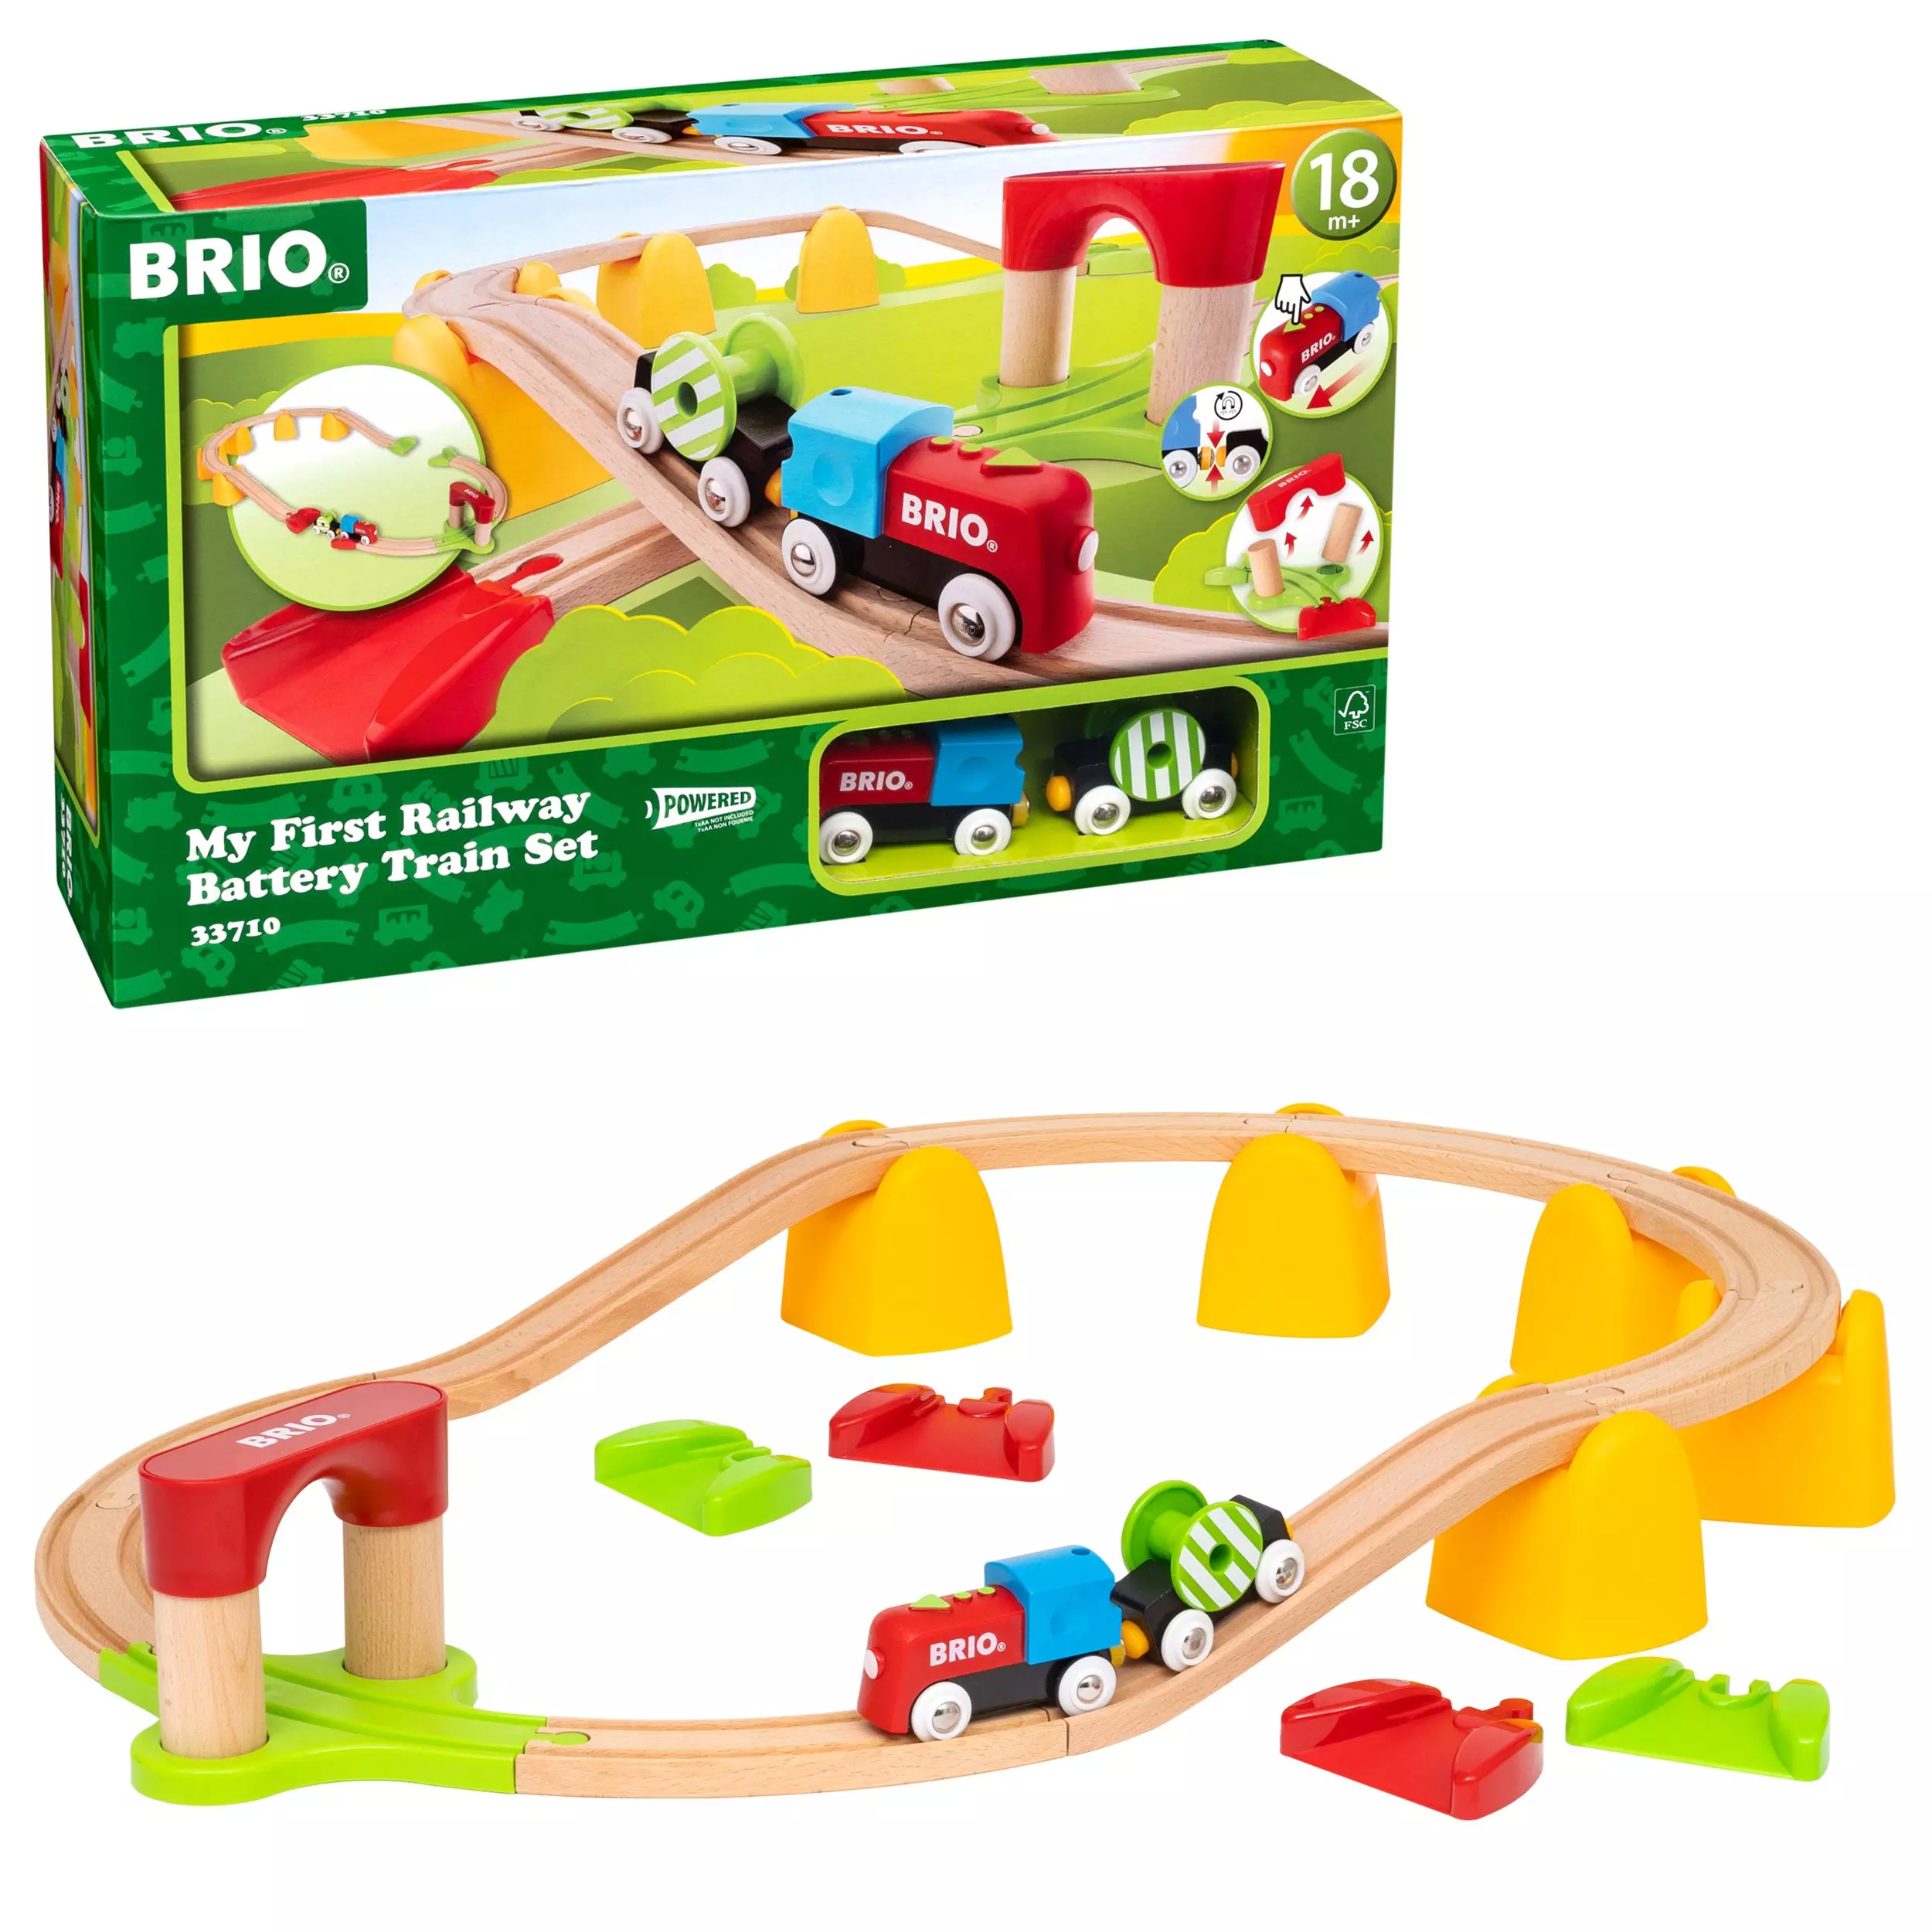 Brio My First Railway Battery Operated